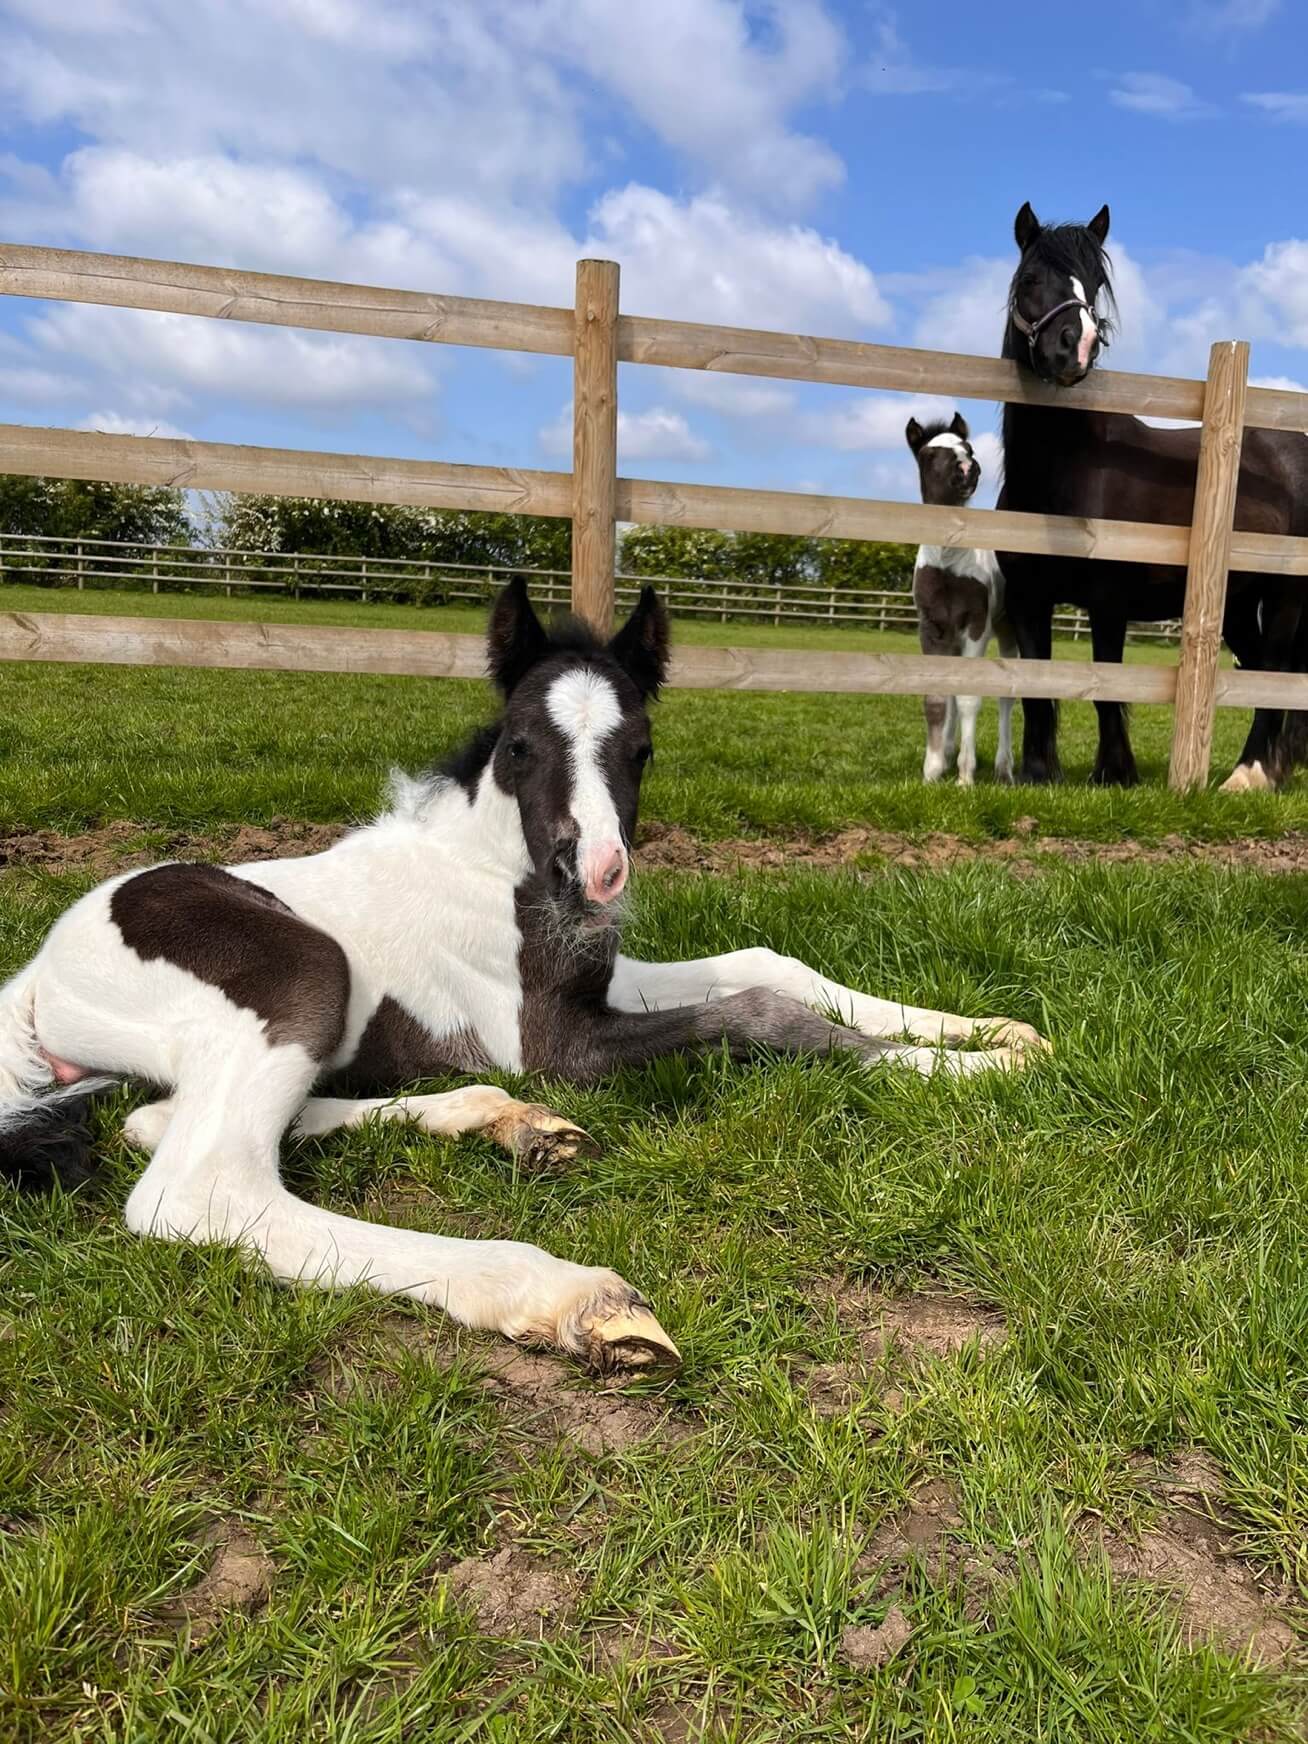 A skewbald foal lying down in a field in the sun overlooked by black mare and another foal